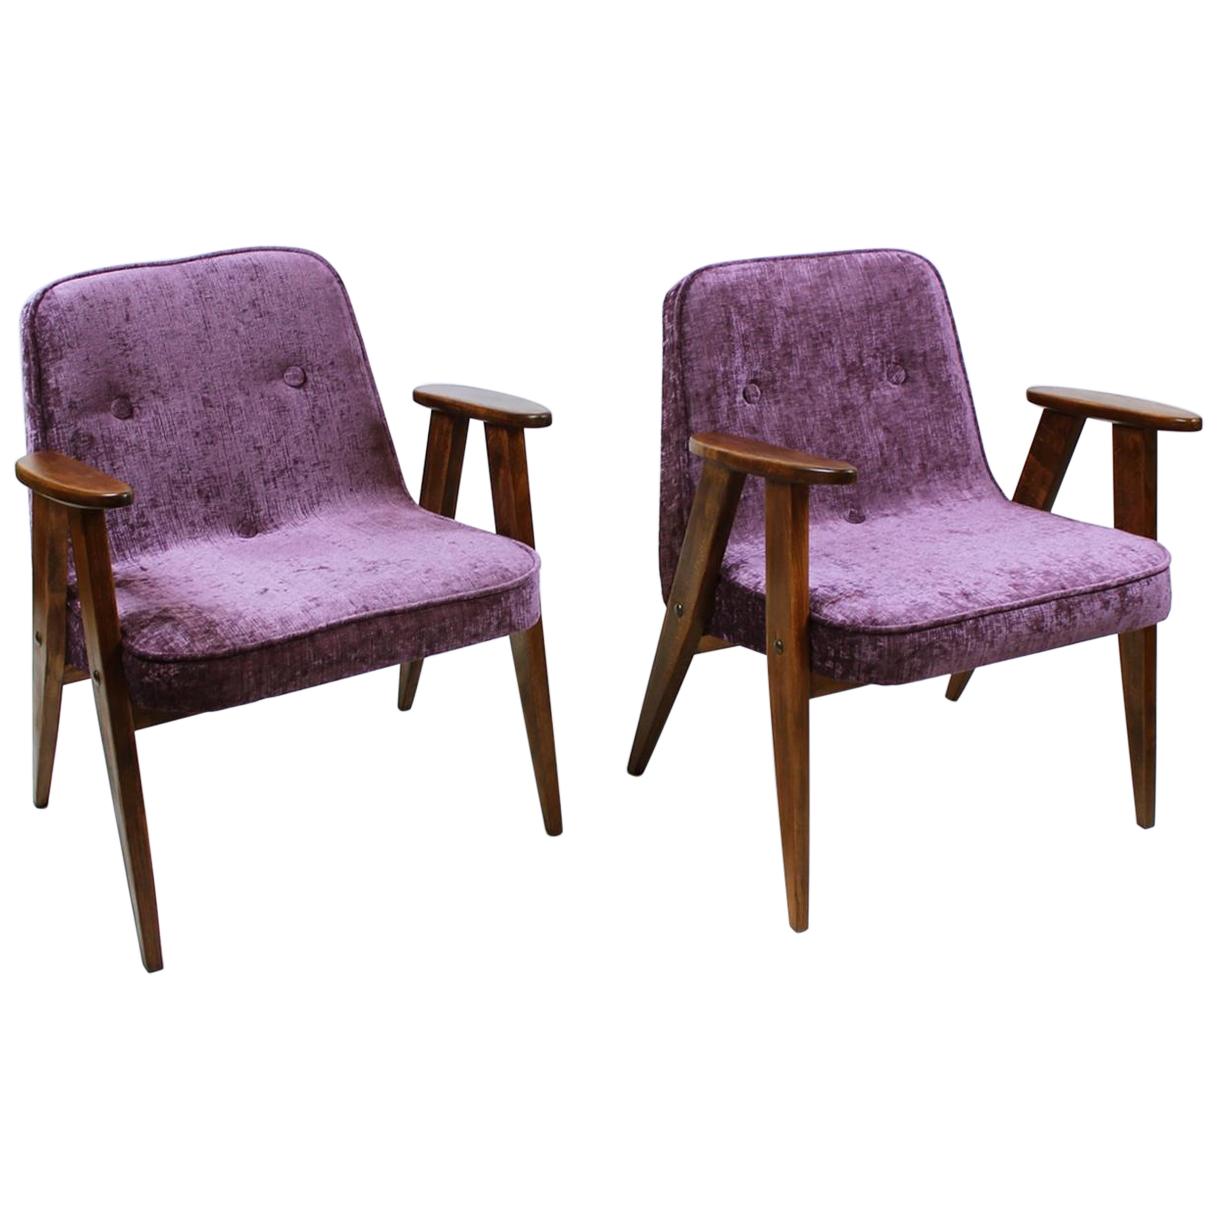 Pair of Midcentury 366 Armchairs by Jozef Chierowski 1960 Poland